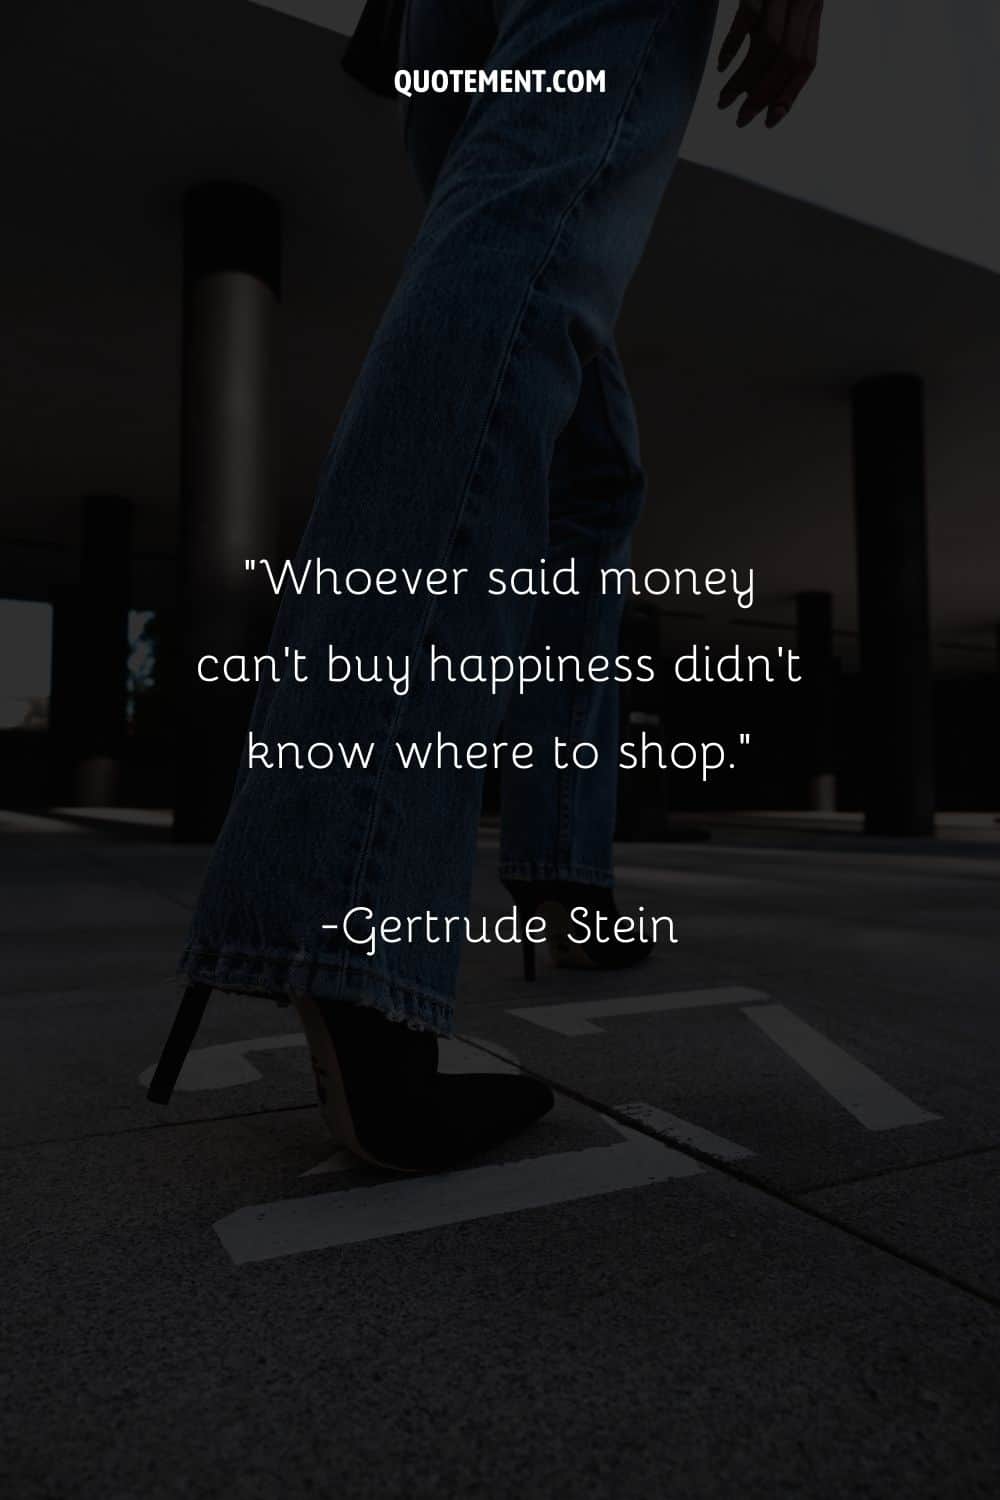 Image of a woman wearing blue jeans and high heels representing quote on money.